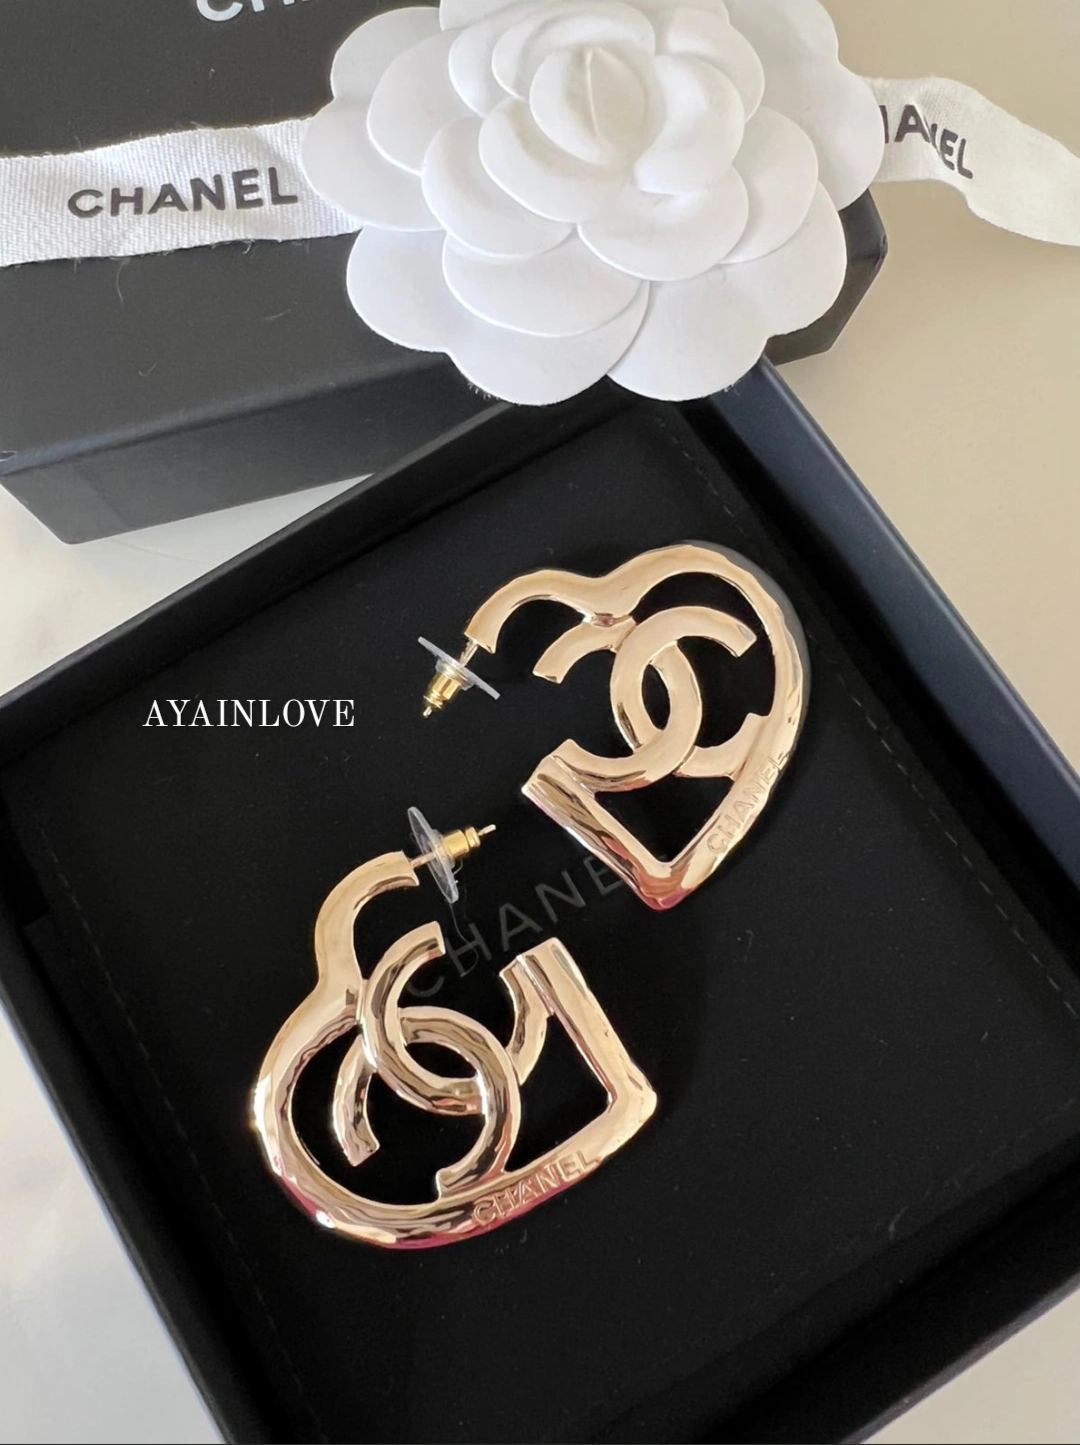 Chanel CC Heart Shape Crystal Red/White Earrings Gold Tone 23C – Coco  Approved Studio